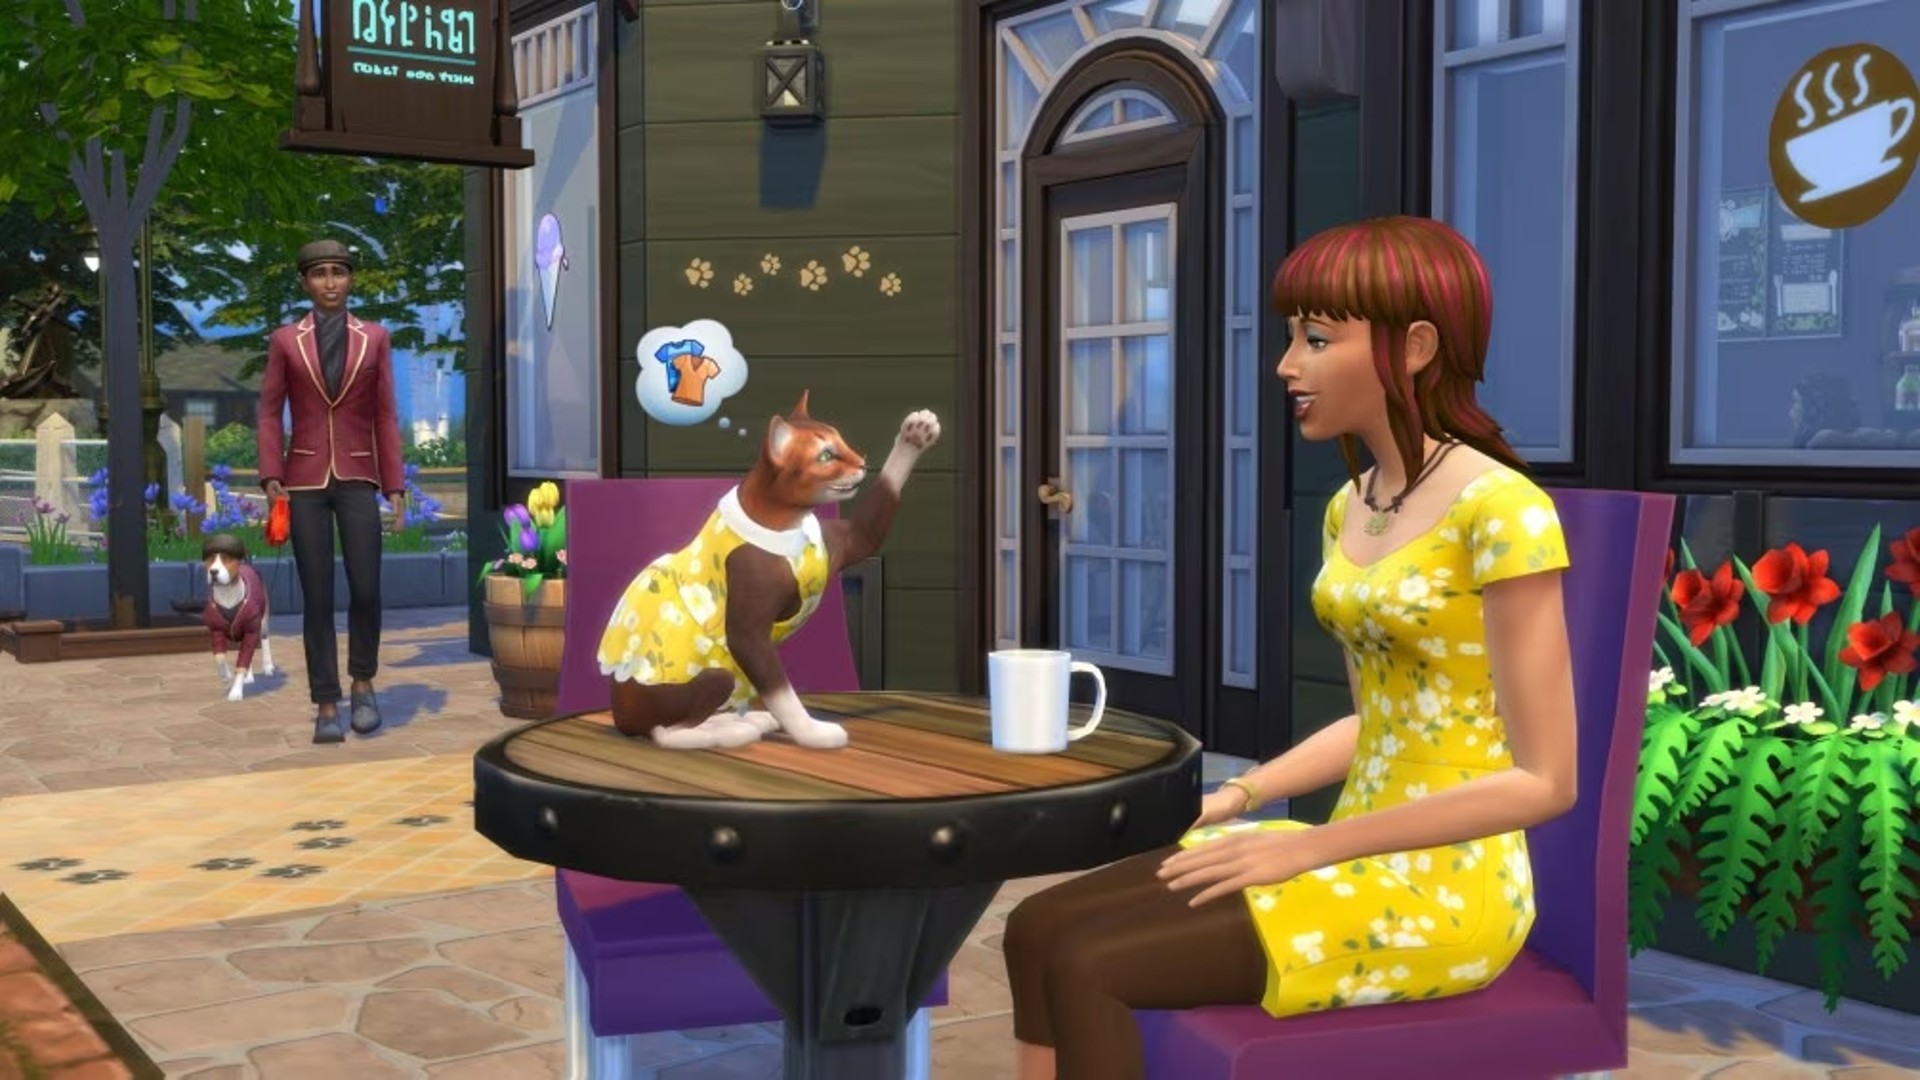 The Sims 4 My First Pet pack